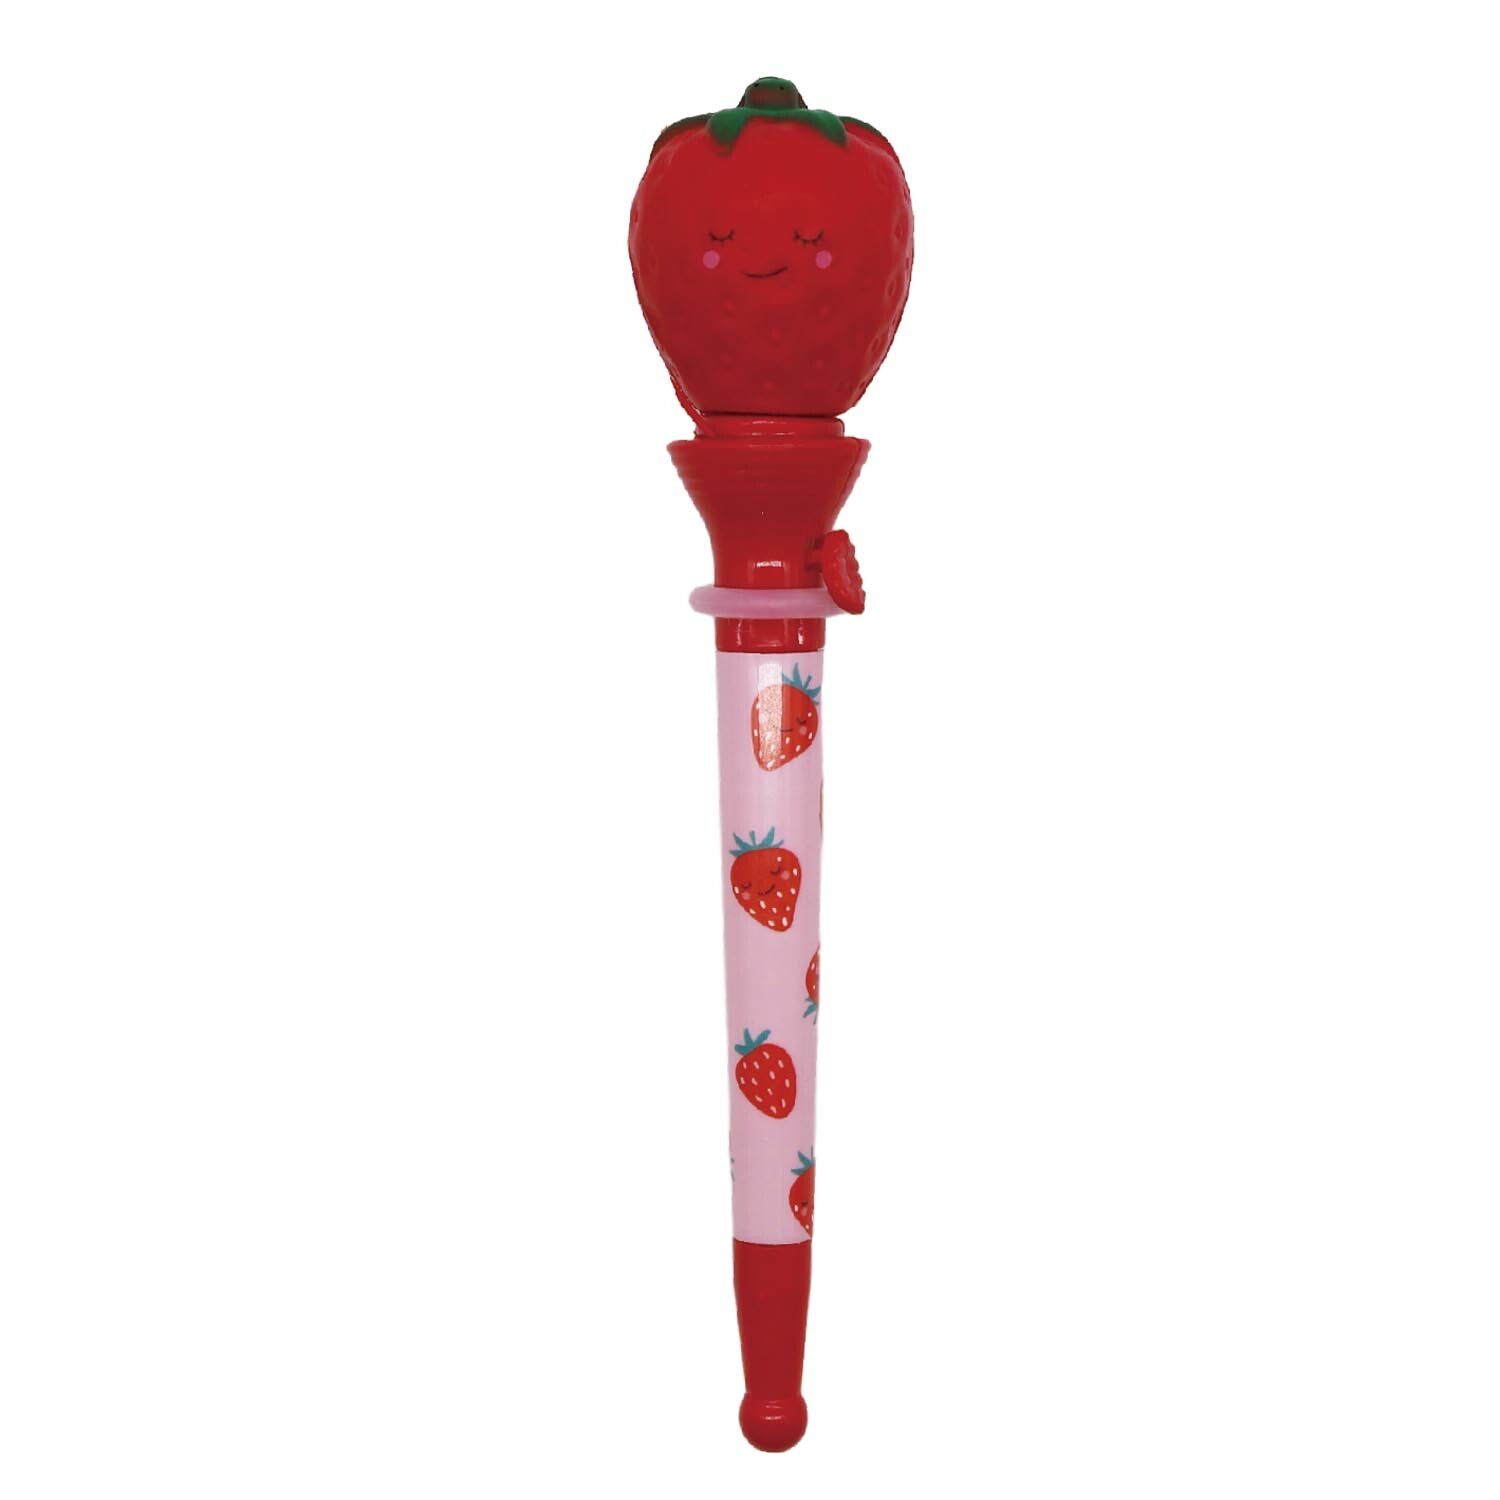 Summer Fruits Strawberry Popping Pen - Red Image 1